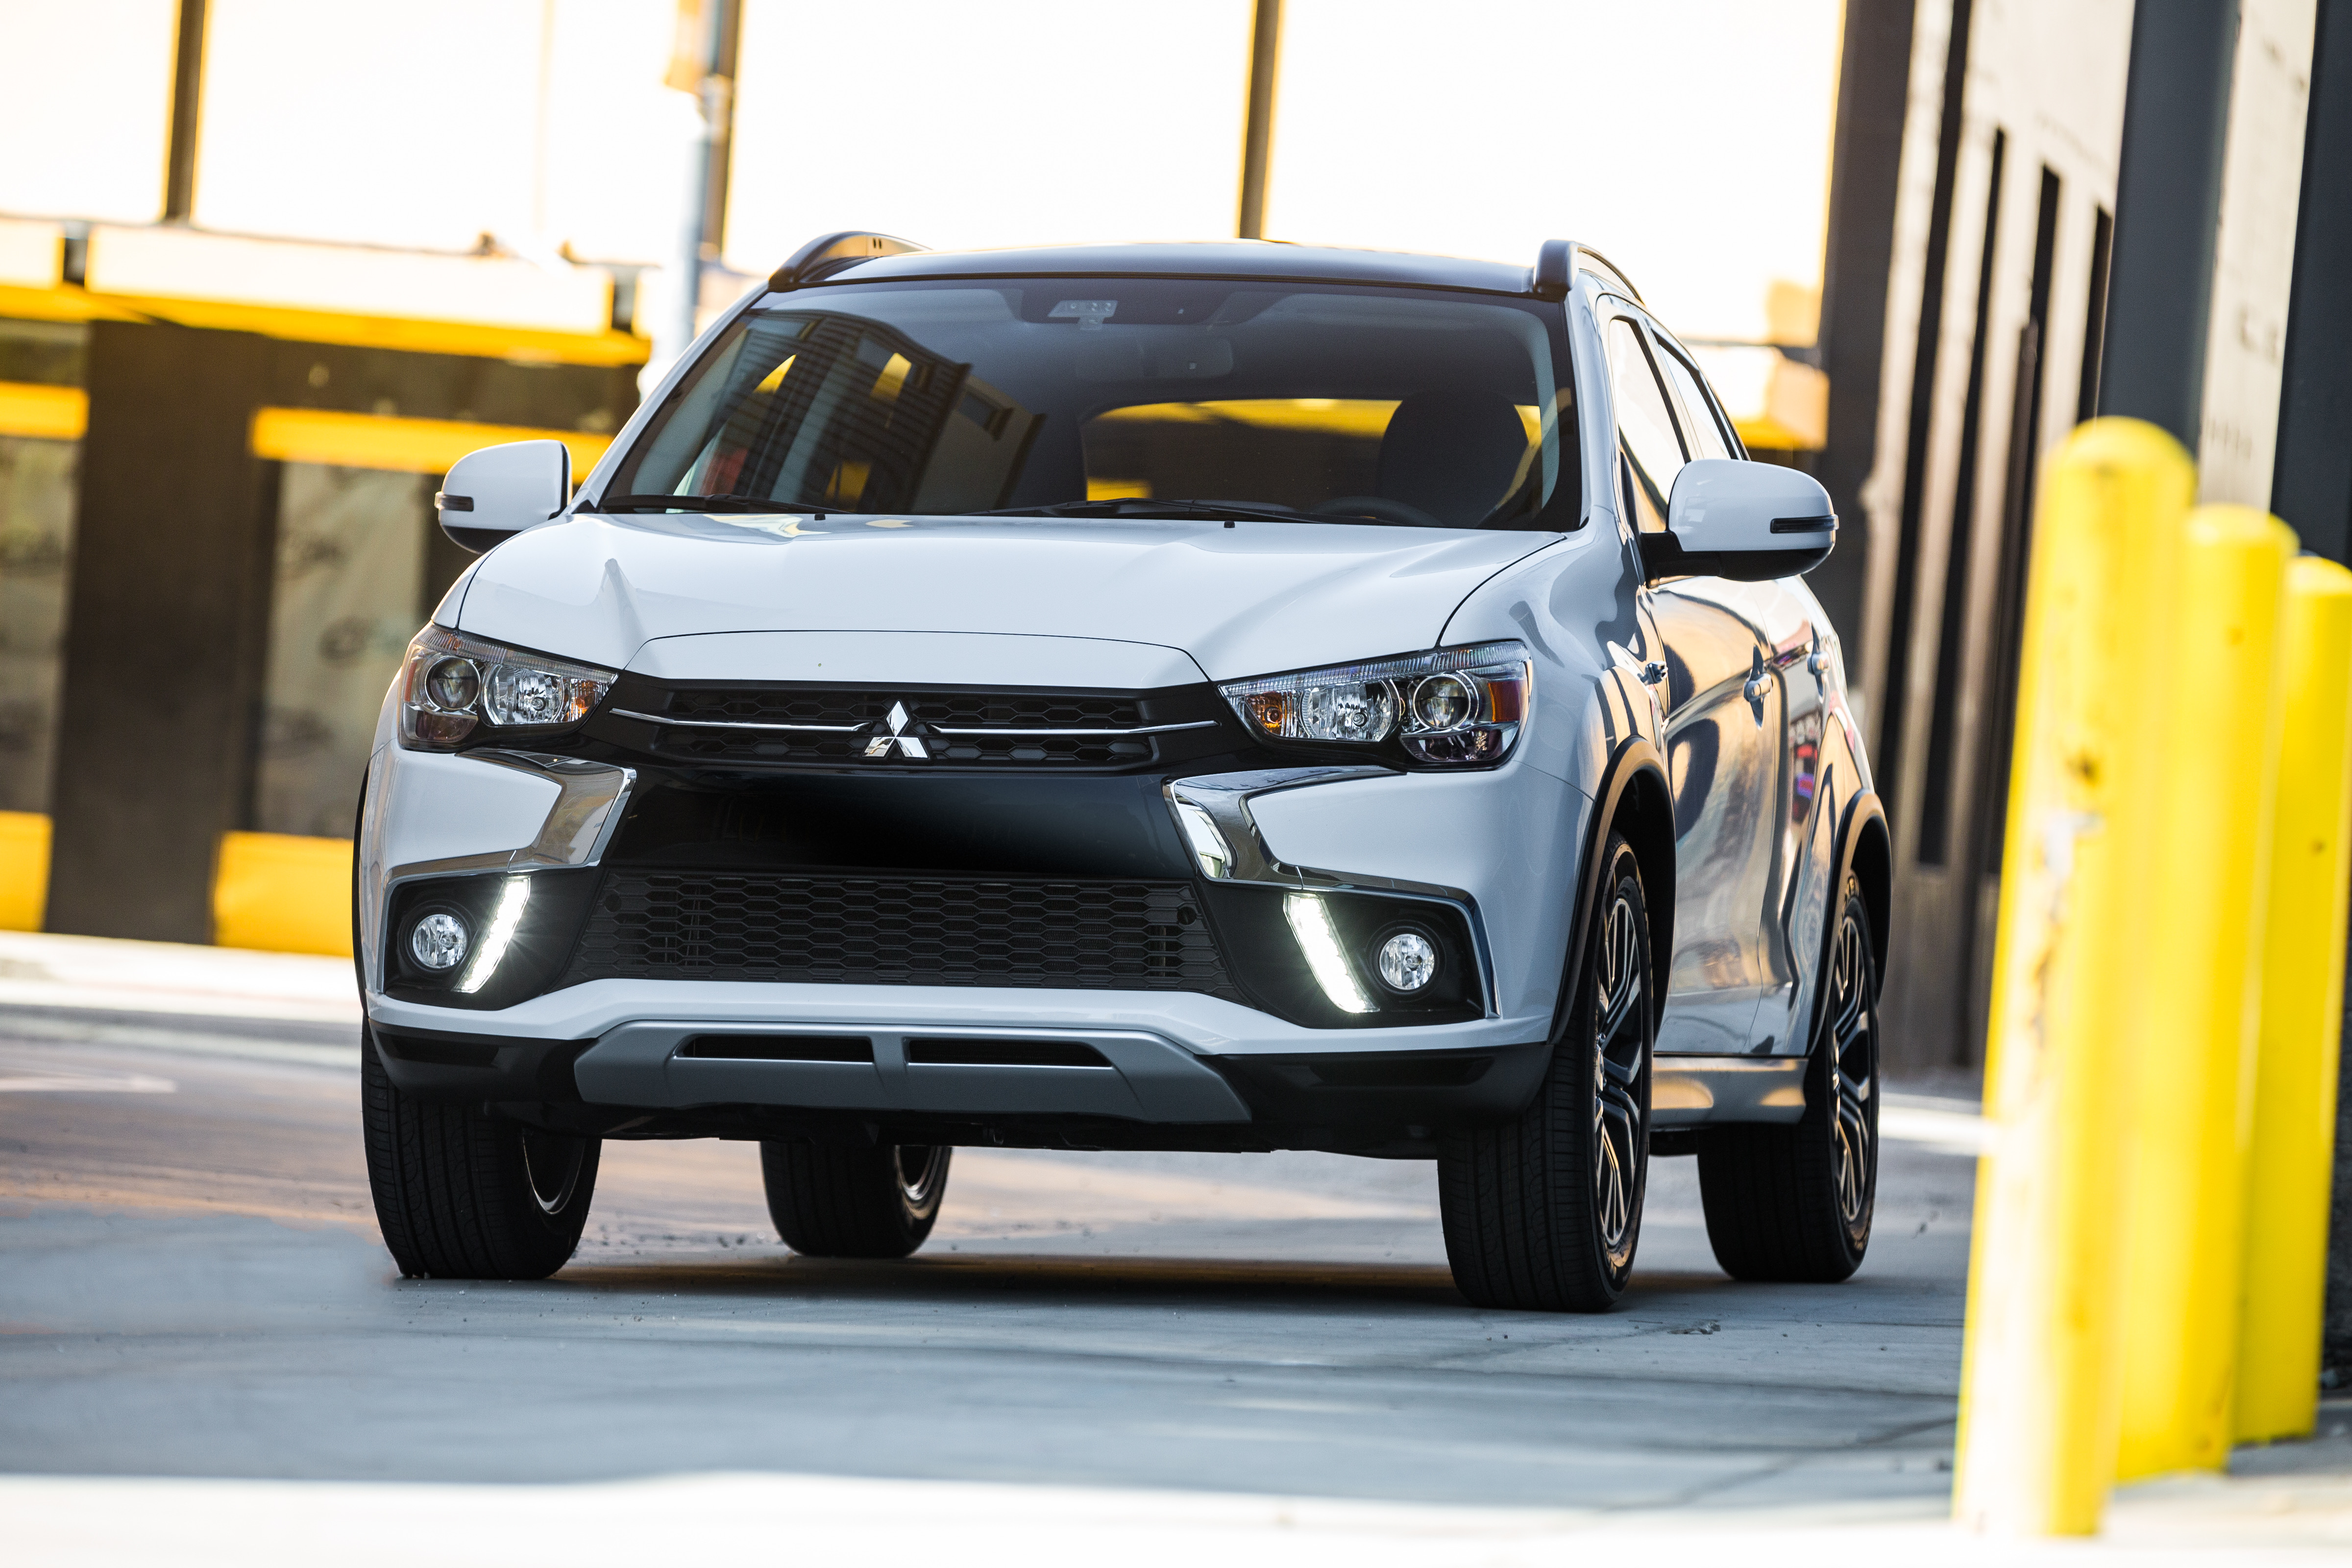 2018 Mitsubishi Outlander: The king of cross over vehicles